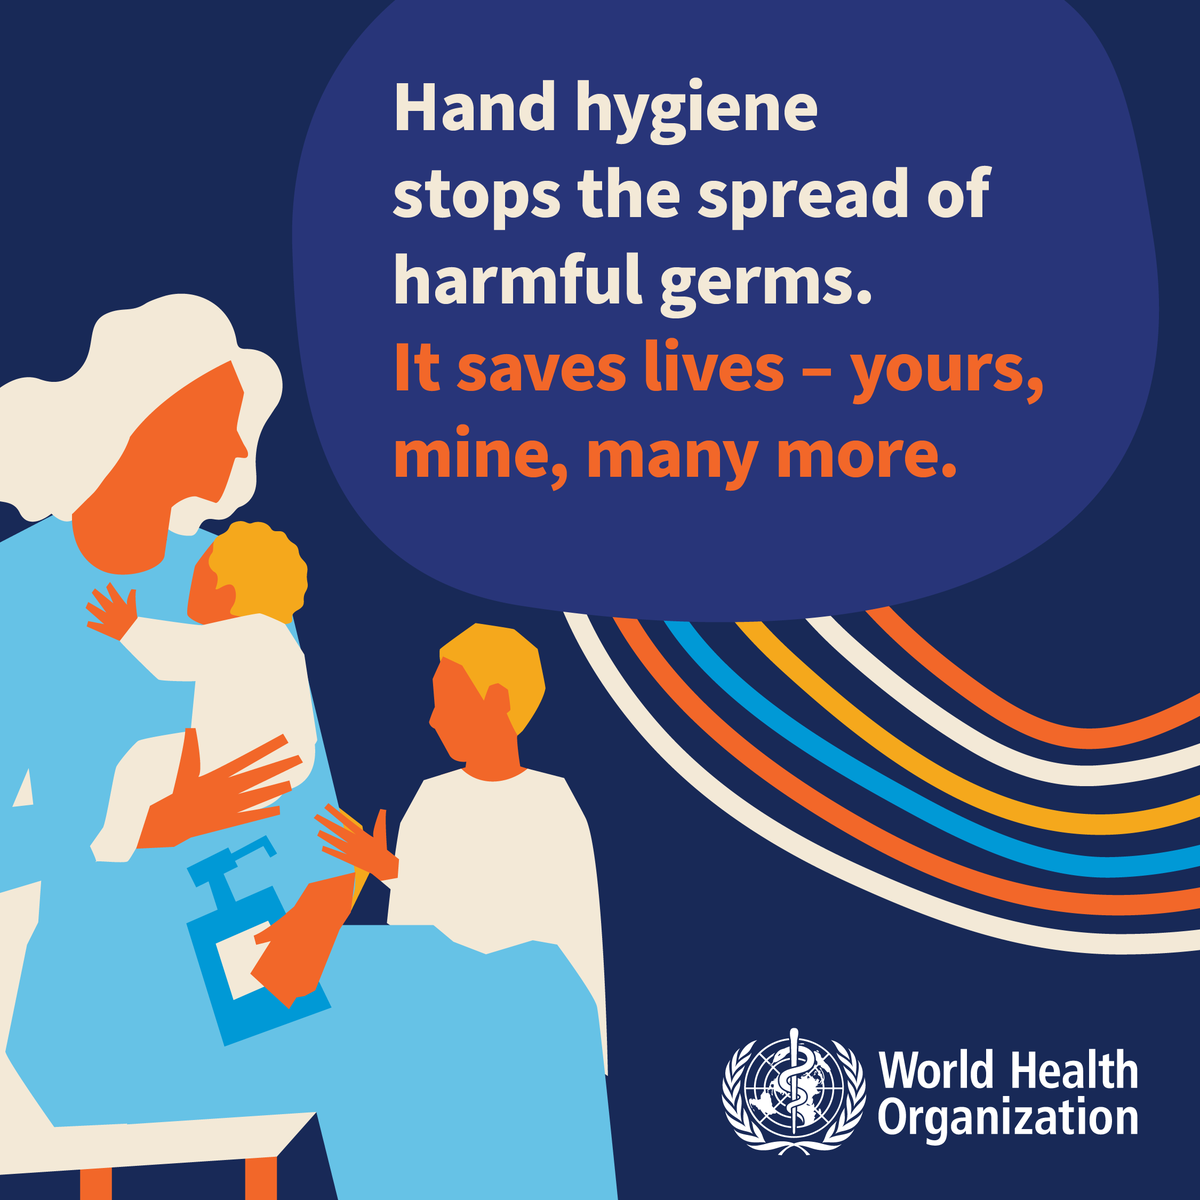 As we approach #WorldHandHygieneDay on May 5, let's remember that #handhygiene saves lives - and can also be cost-effective: Research across 34 OECD and EU/EEA countries found that investing US$ 1 in improving #handhygiene in healthcare settings result in ca. US$ 24.6 in returns.